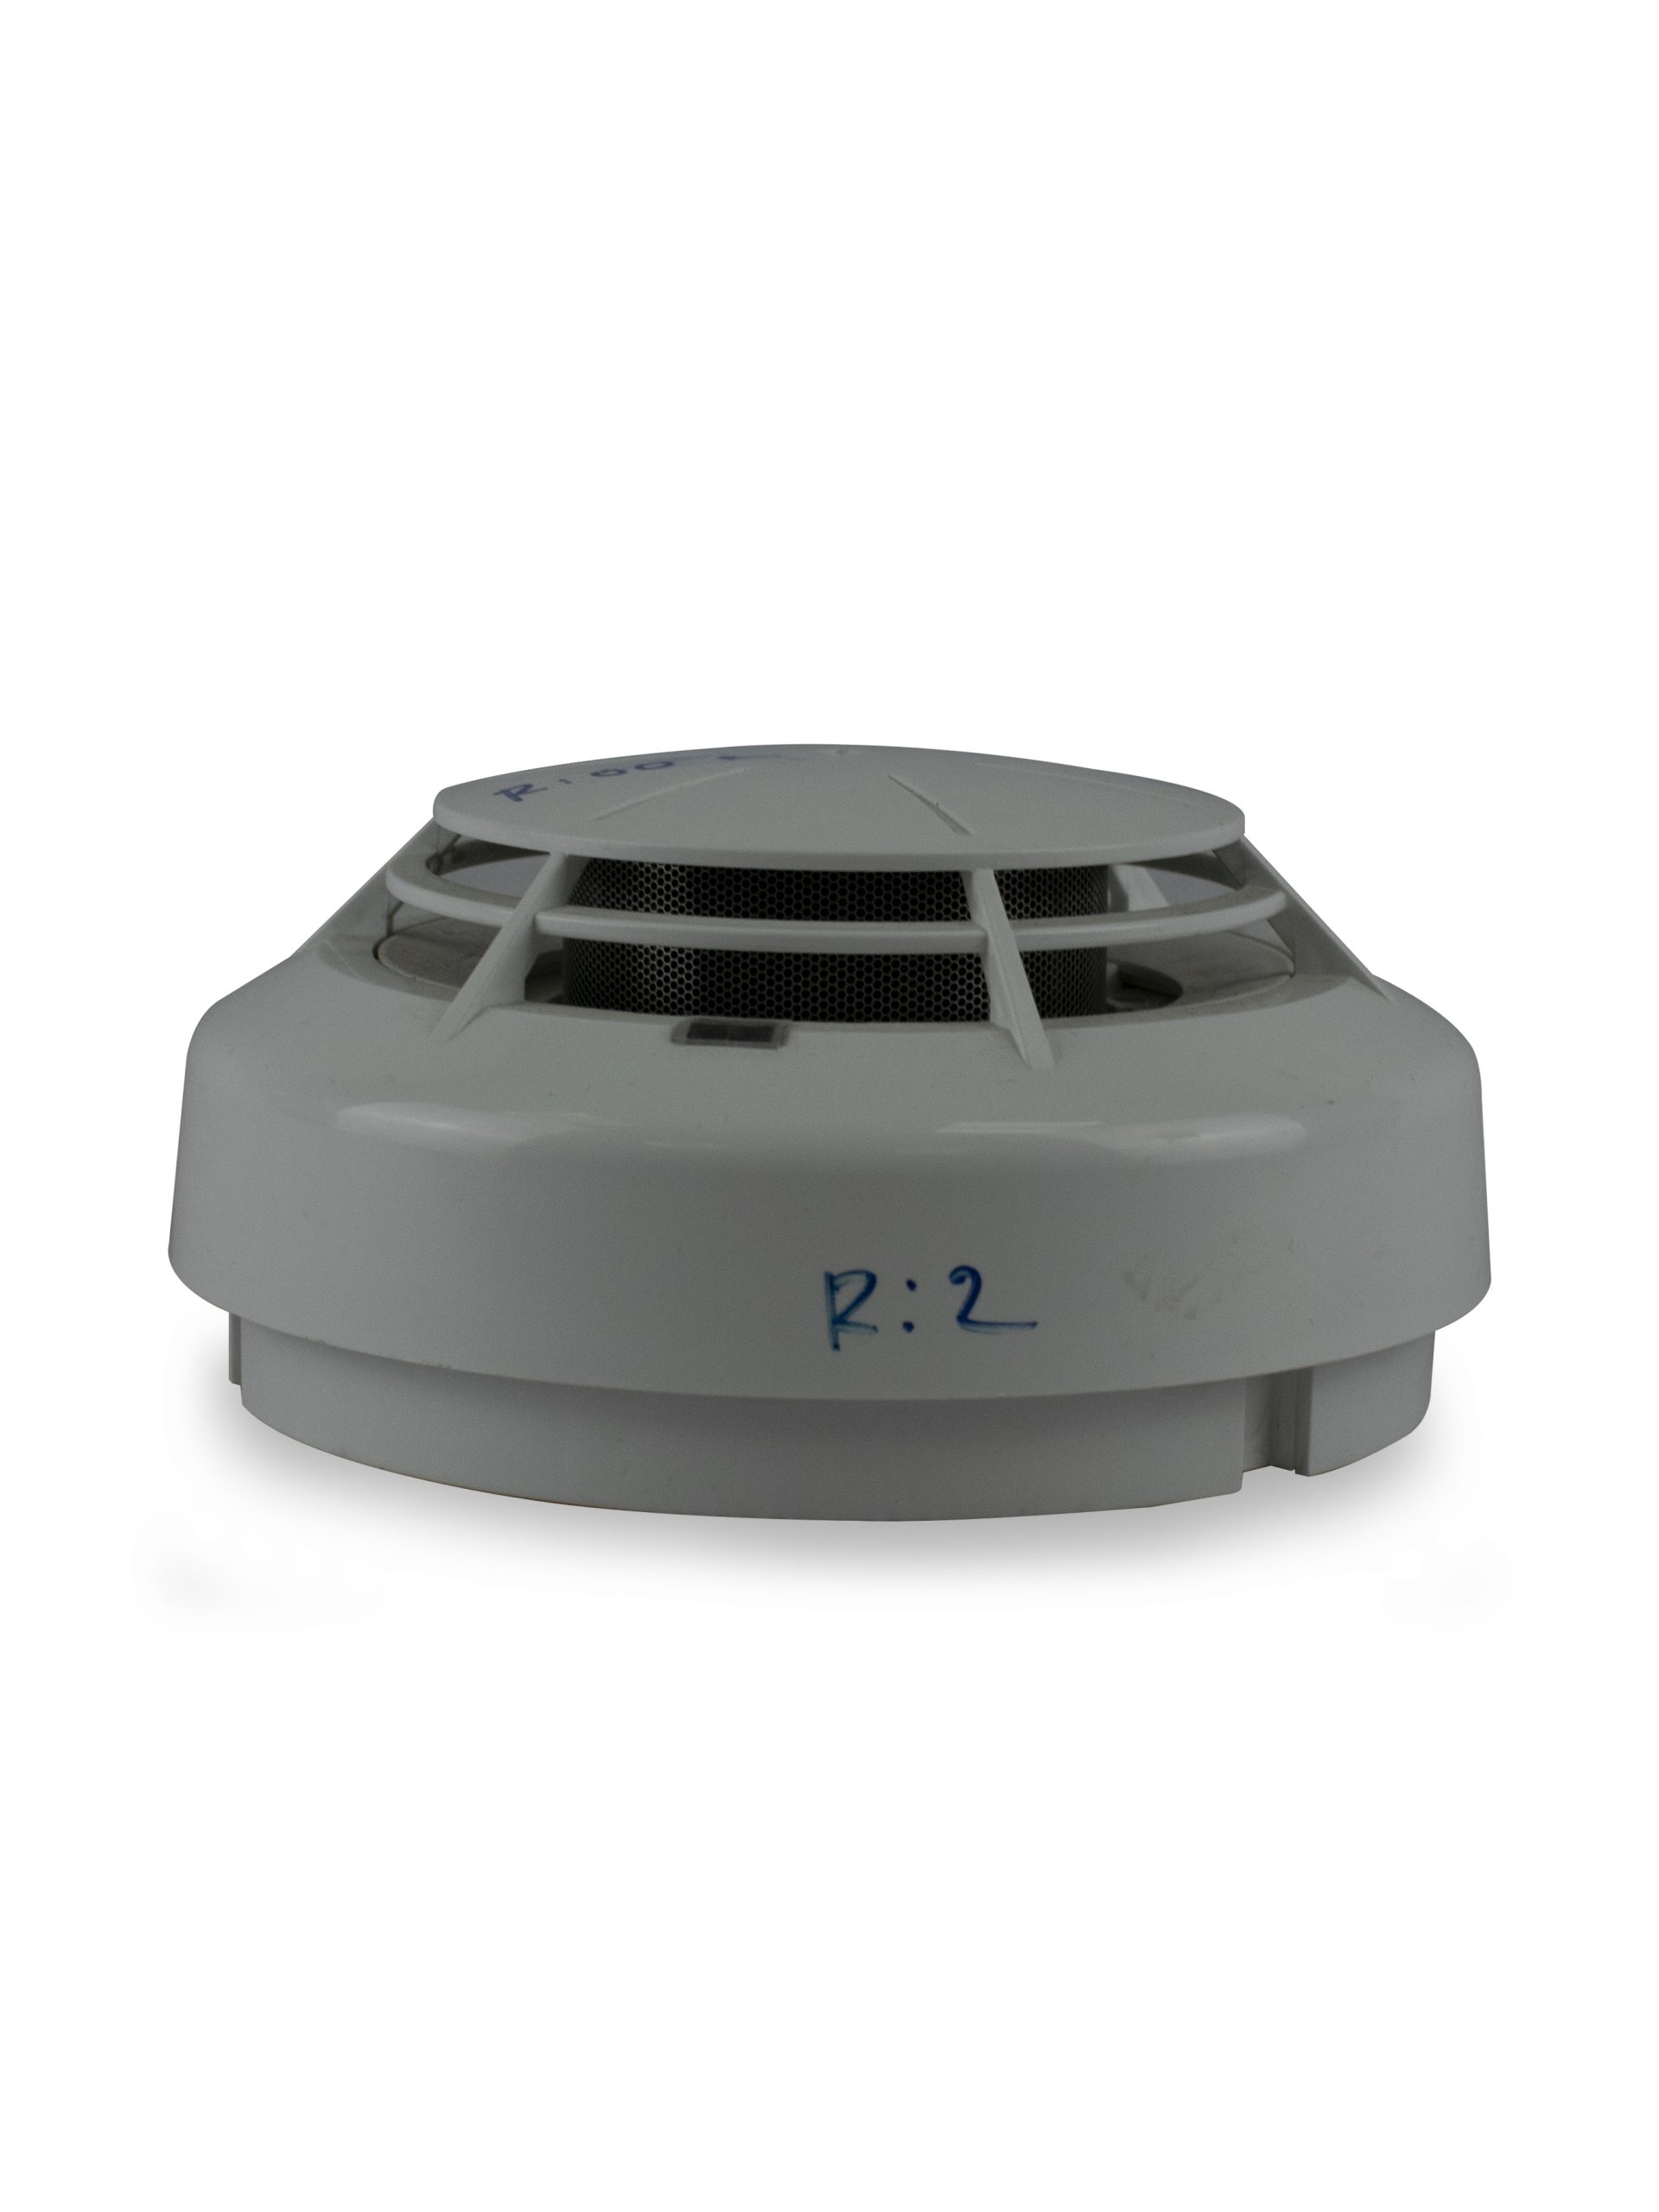 ADDRESSABLE SMOKE DETECTOR WITH NORMAL BASE , PA